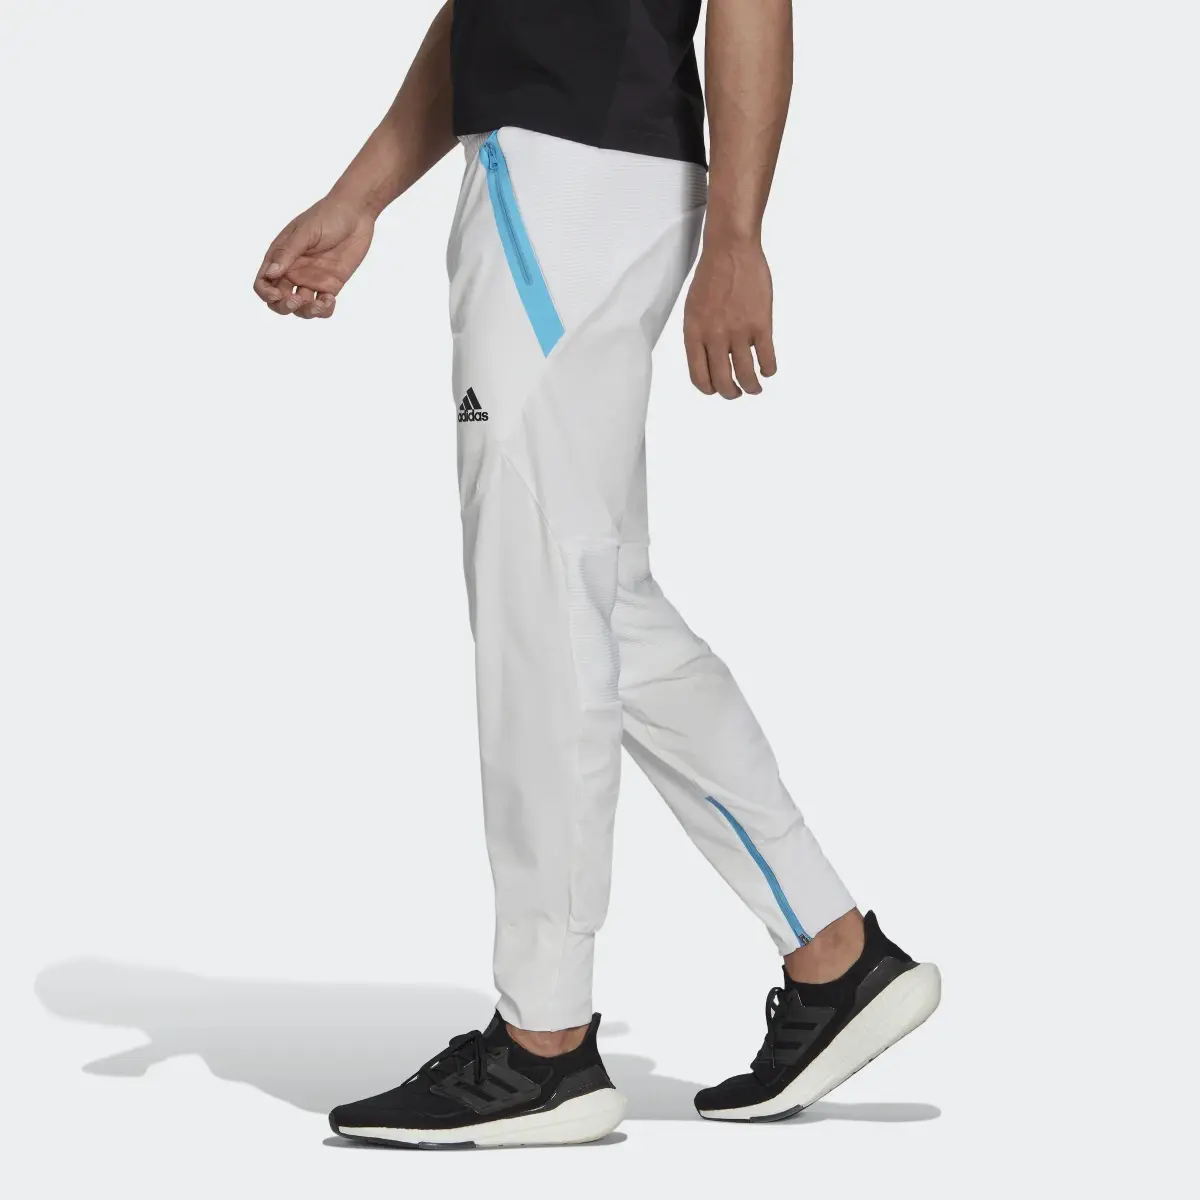 Adidas Designed for Gameday Pants. 2